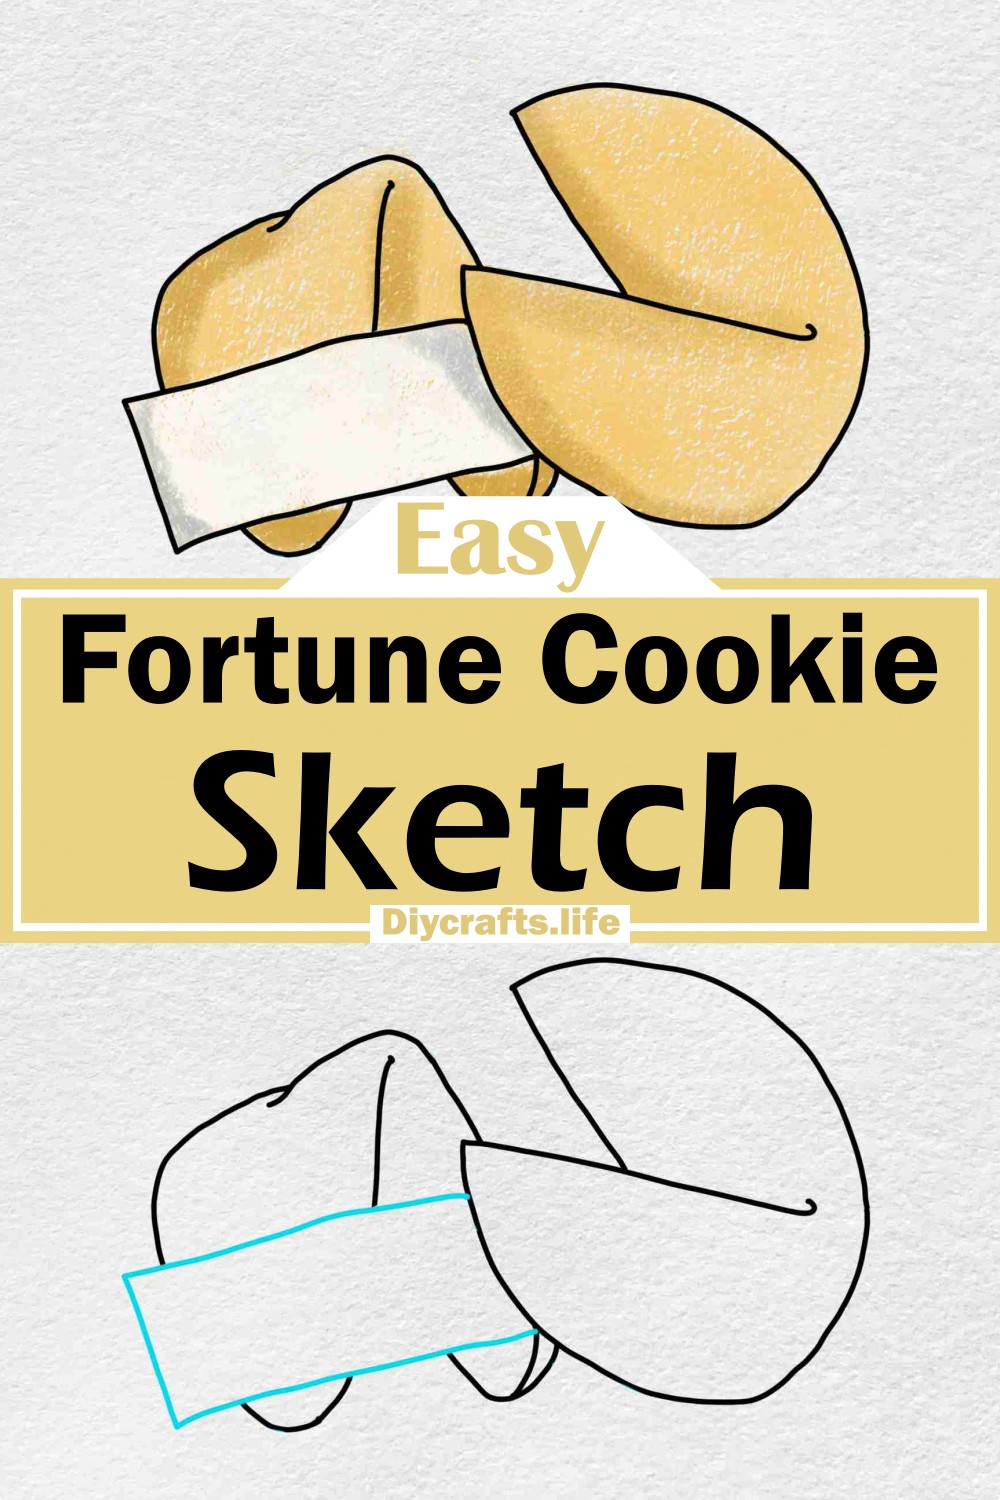 Fortune Cookie Sketch